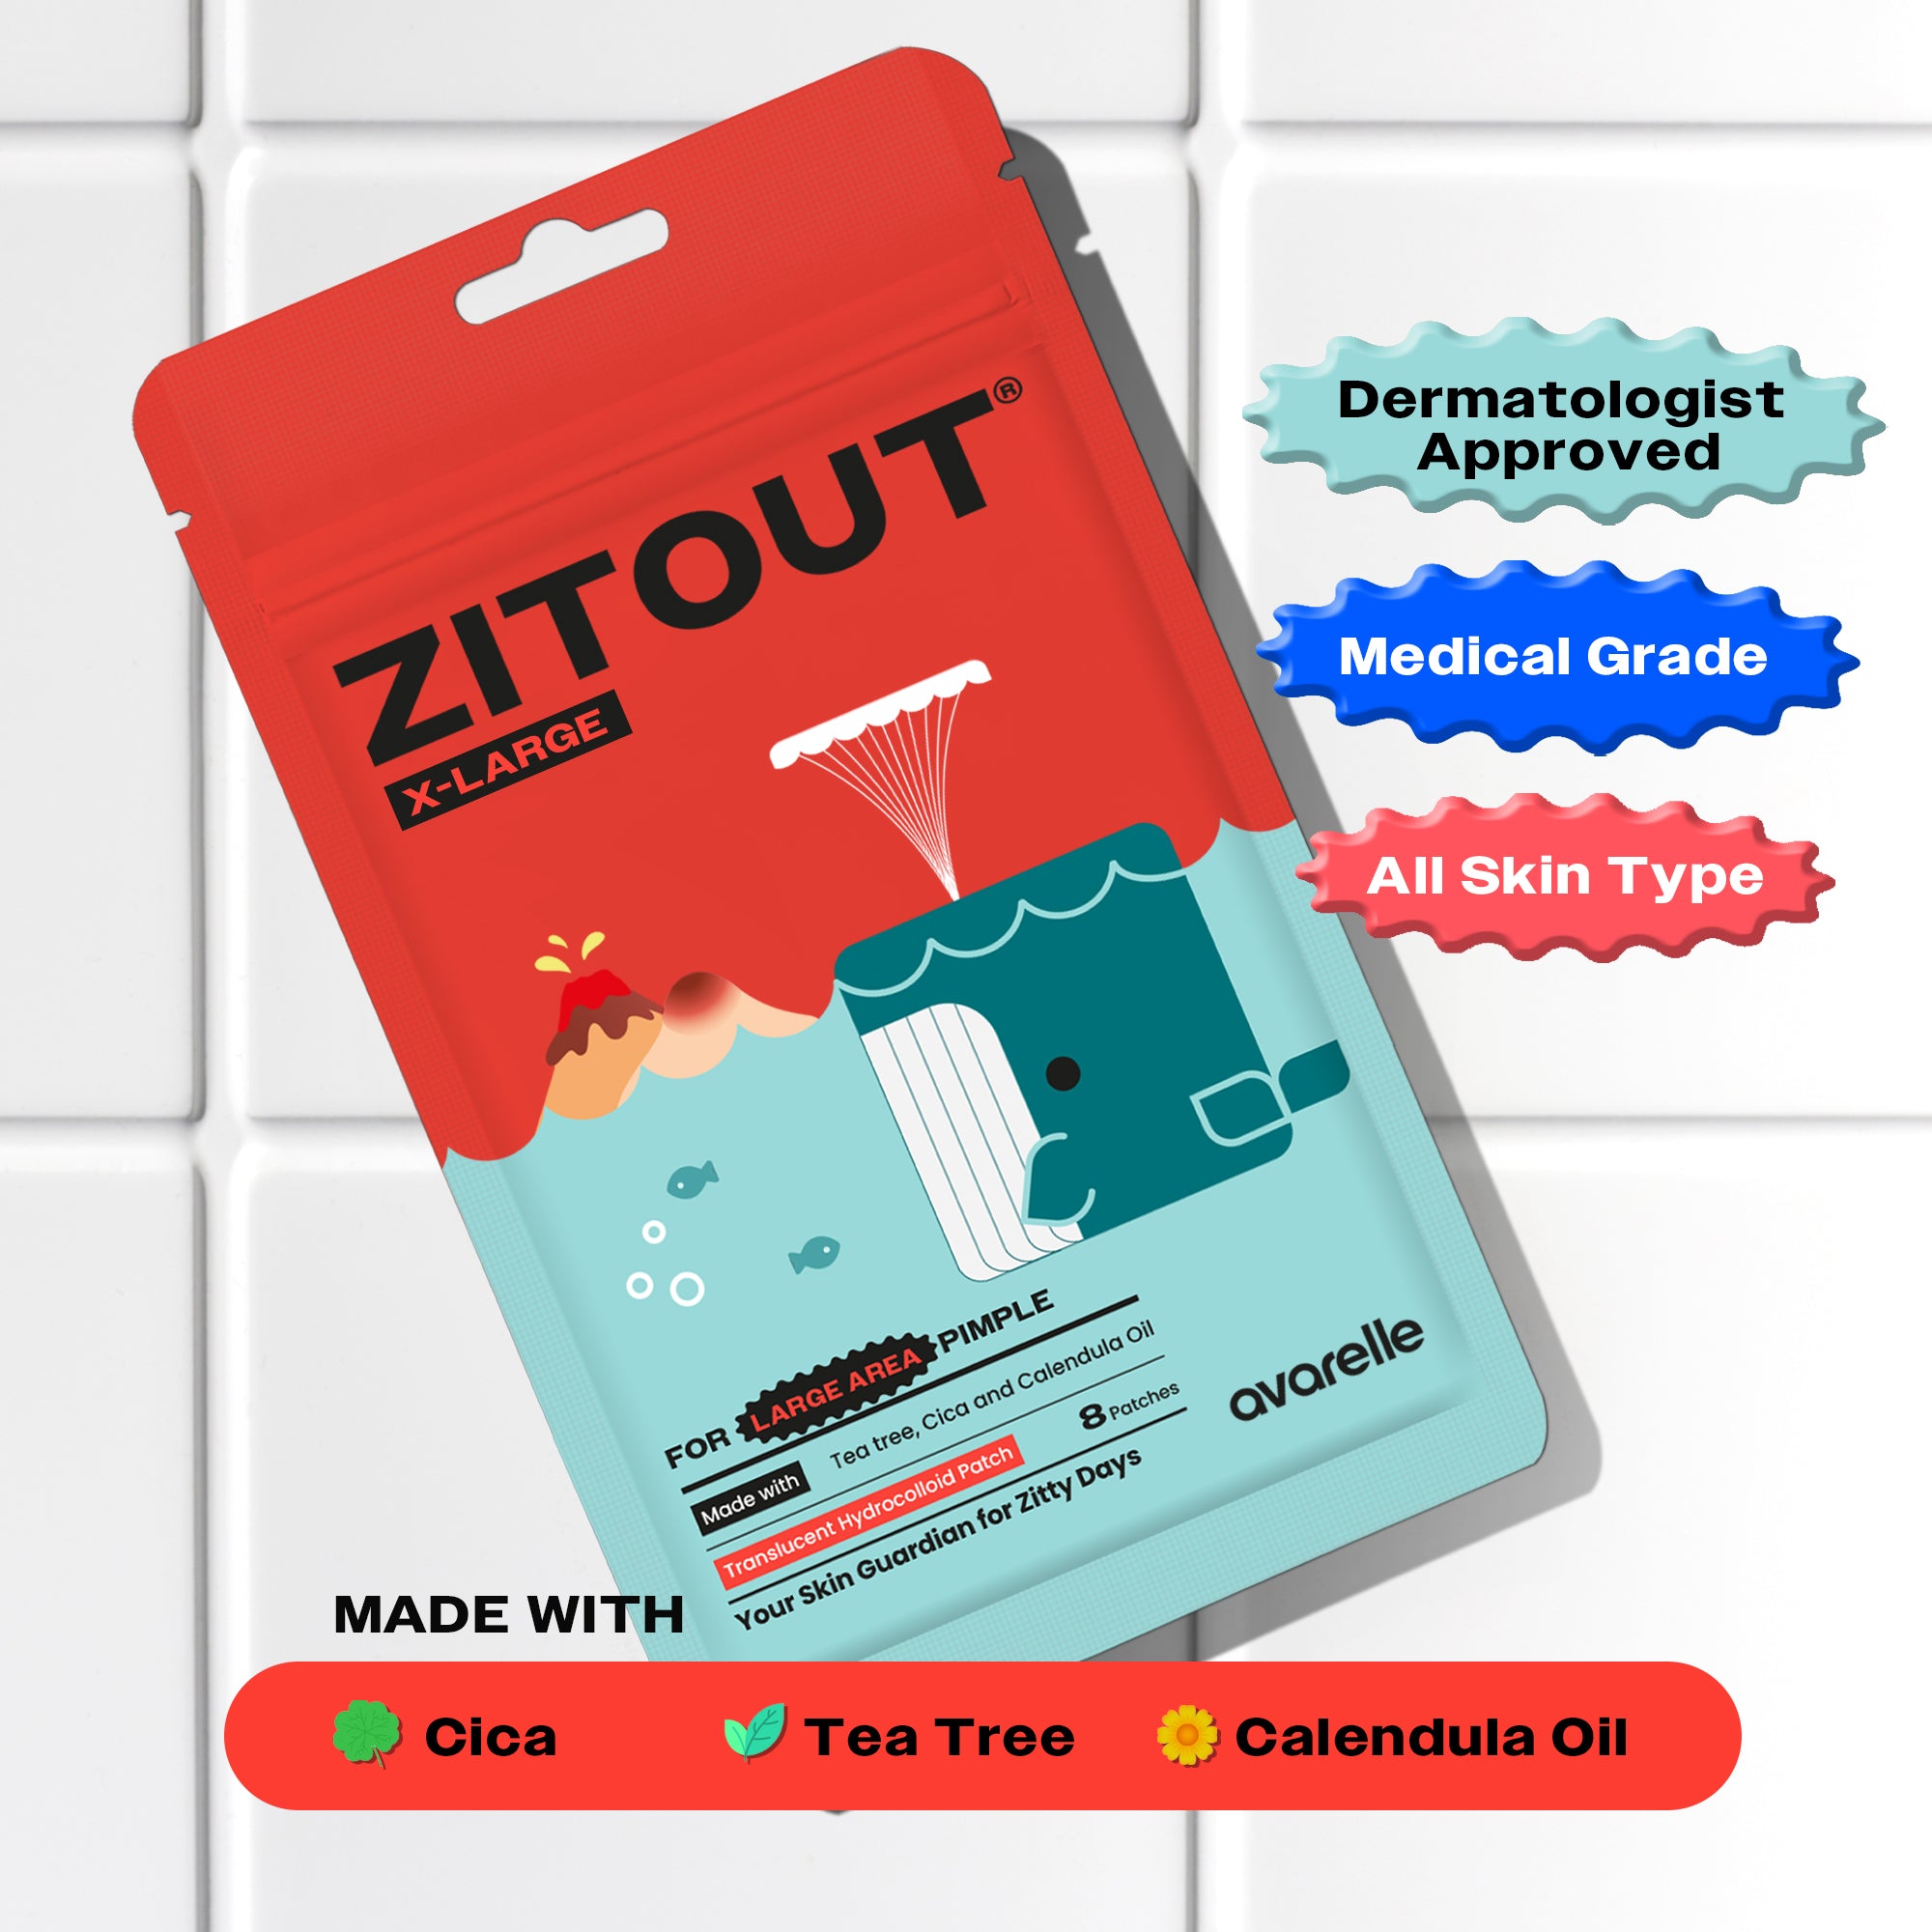 ZITOUT® X-Large 8CT | Acne Cover Pimple Patches for Face | Acne Spot Dots for All Skin Types | Alcohol Free Paraben Free Vegan Cruelty Free